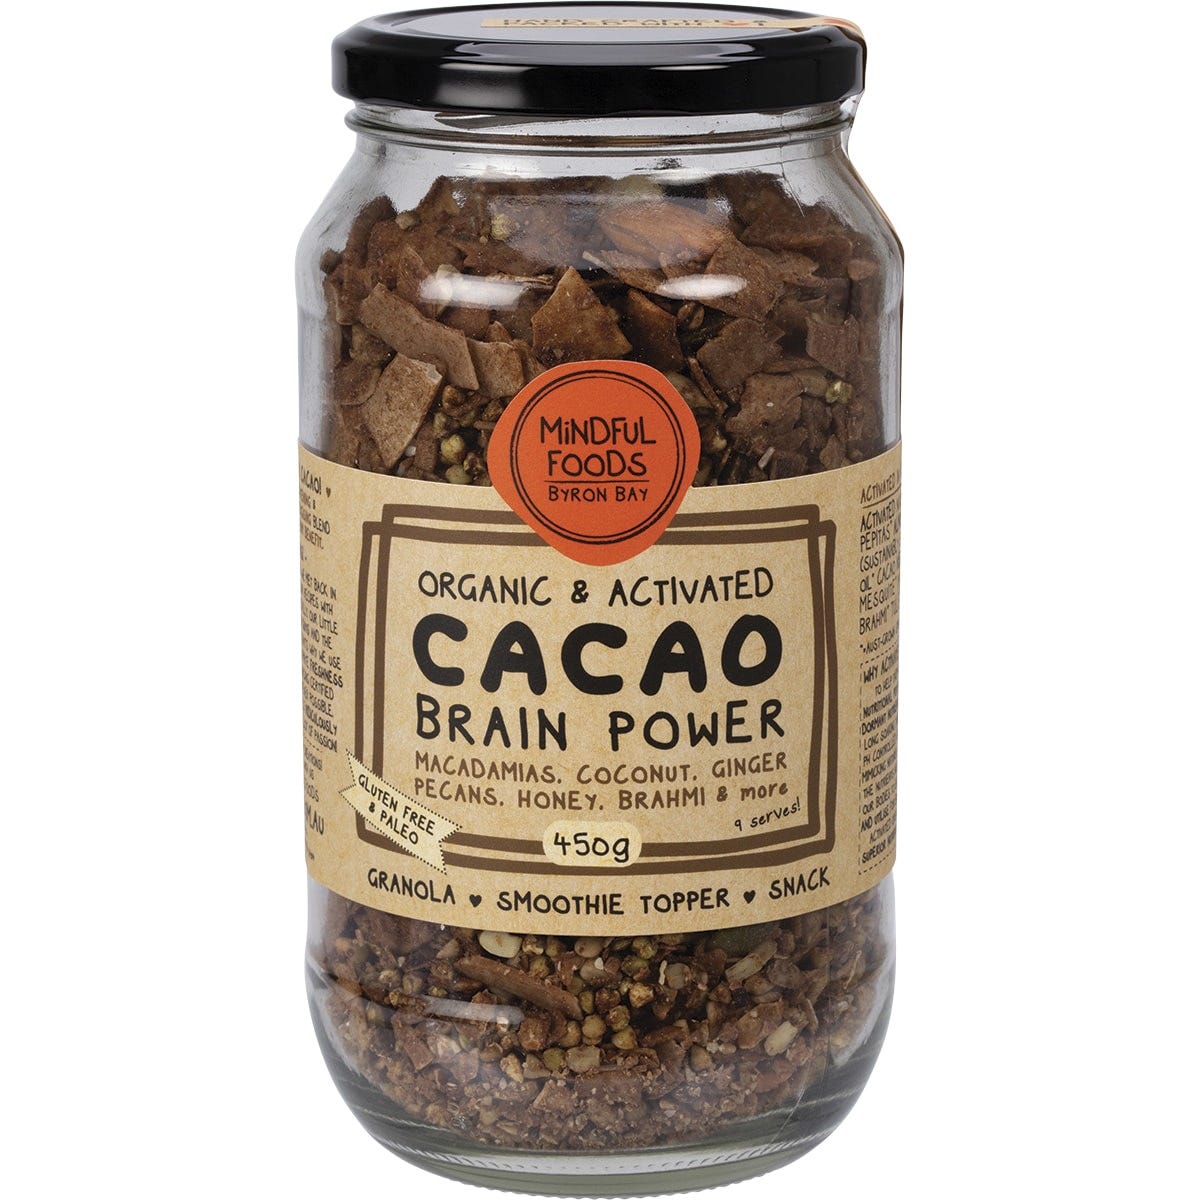 Mindful Foods Cacao Brain Power Granola Organic & Activated 450g - Dr Earth - Breakfast